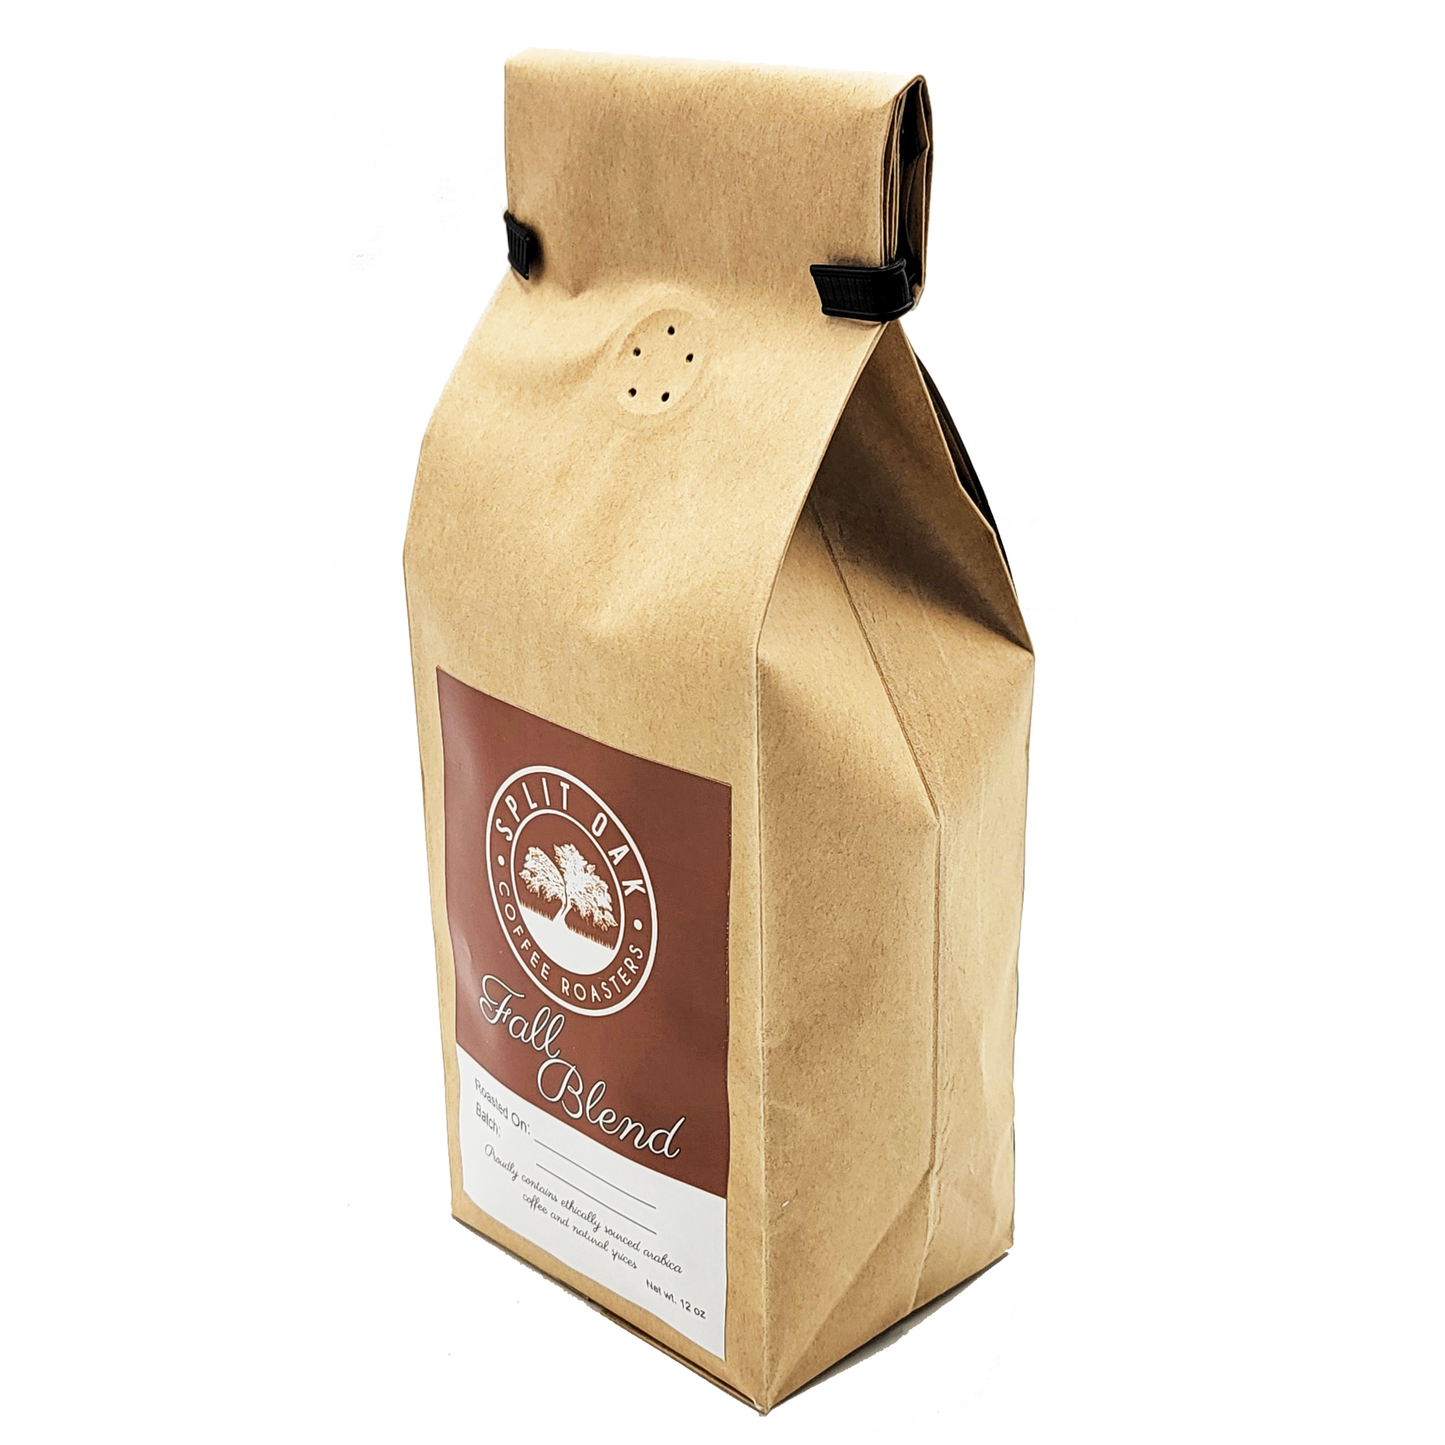 3 Pack Special Coffee Fall Blend notes of chocolate, cherry and cream, hand roasted - Limited Edition